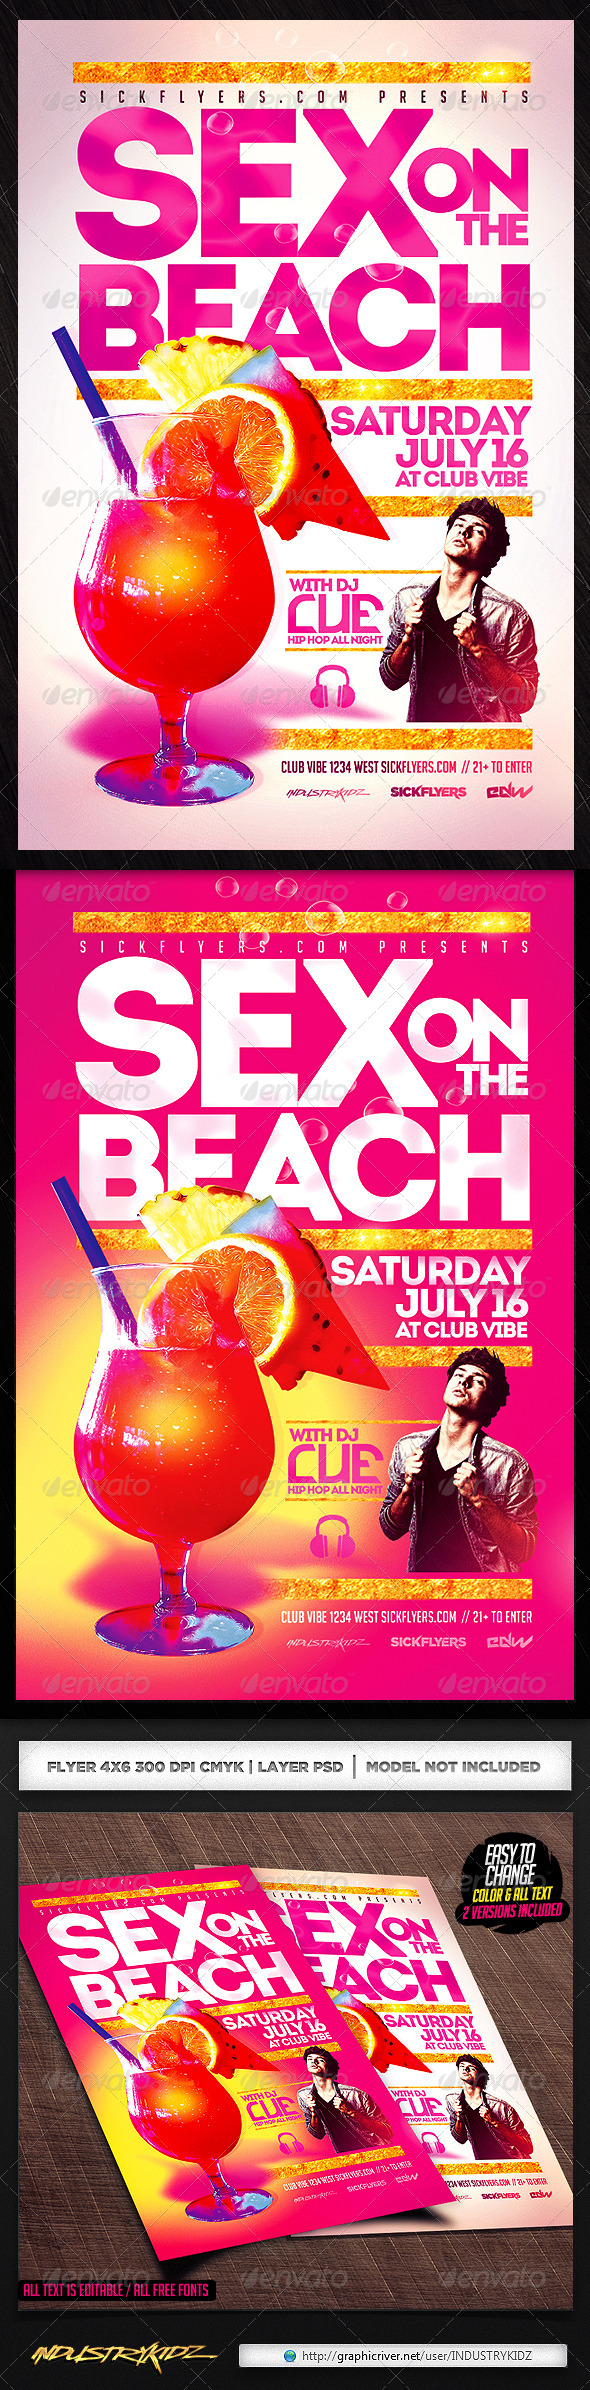 Sex On The Beach Flyer Template PSD - Clubs & Parties Events